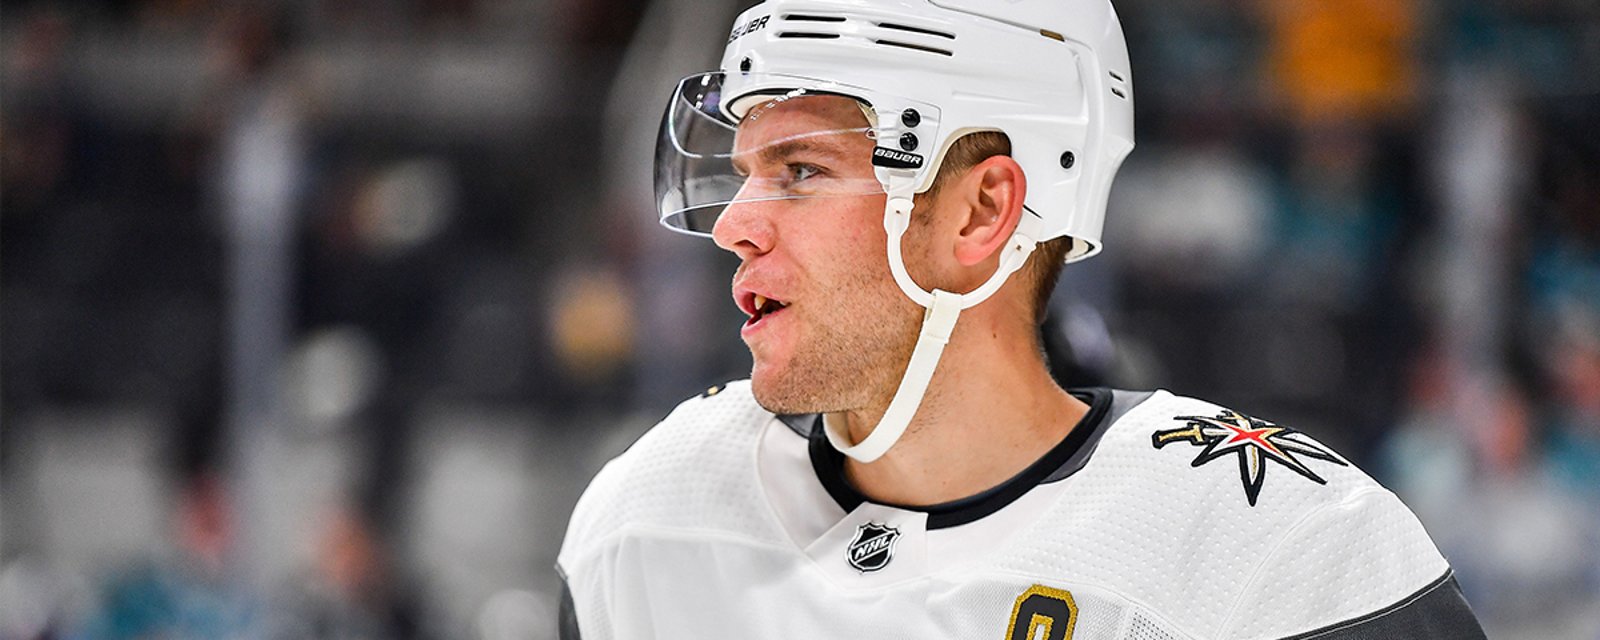 The worst is confirmed for Vegas’ Stastny